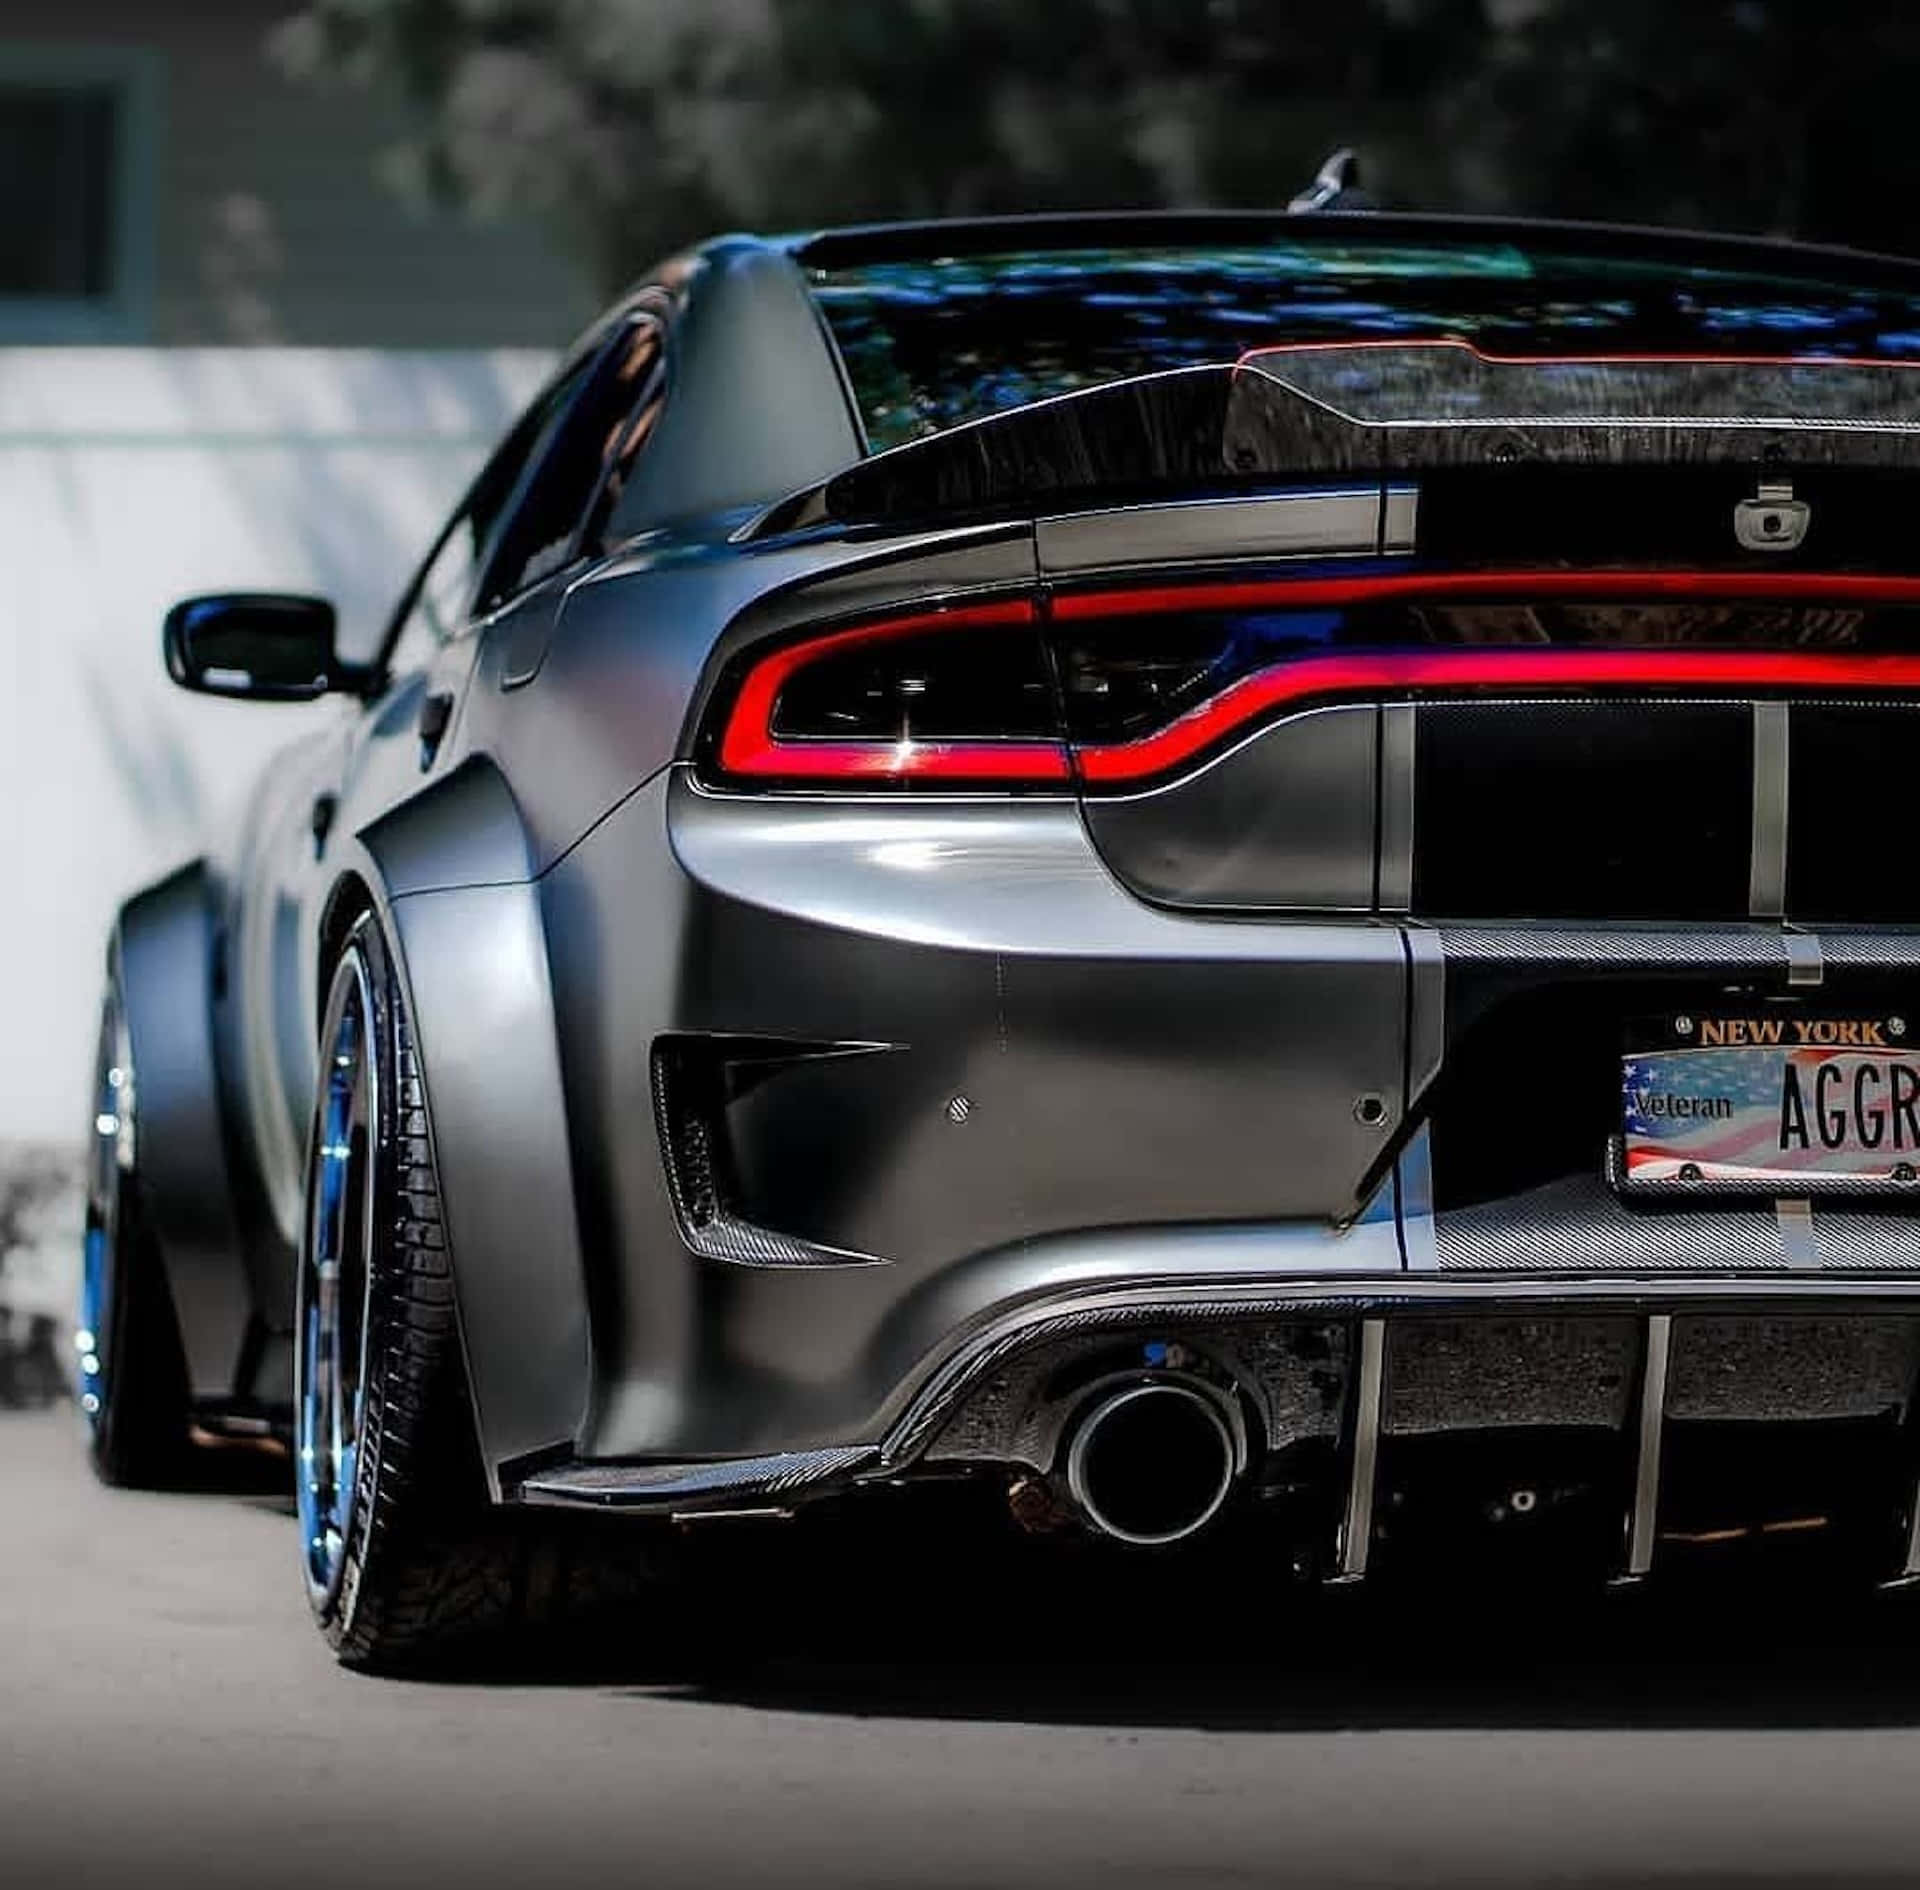 Dodge Charger Hellcat Rear View Wallpaper